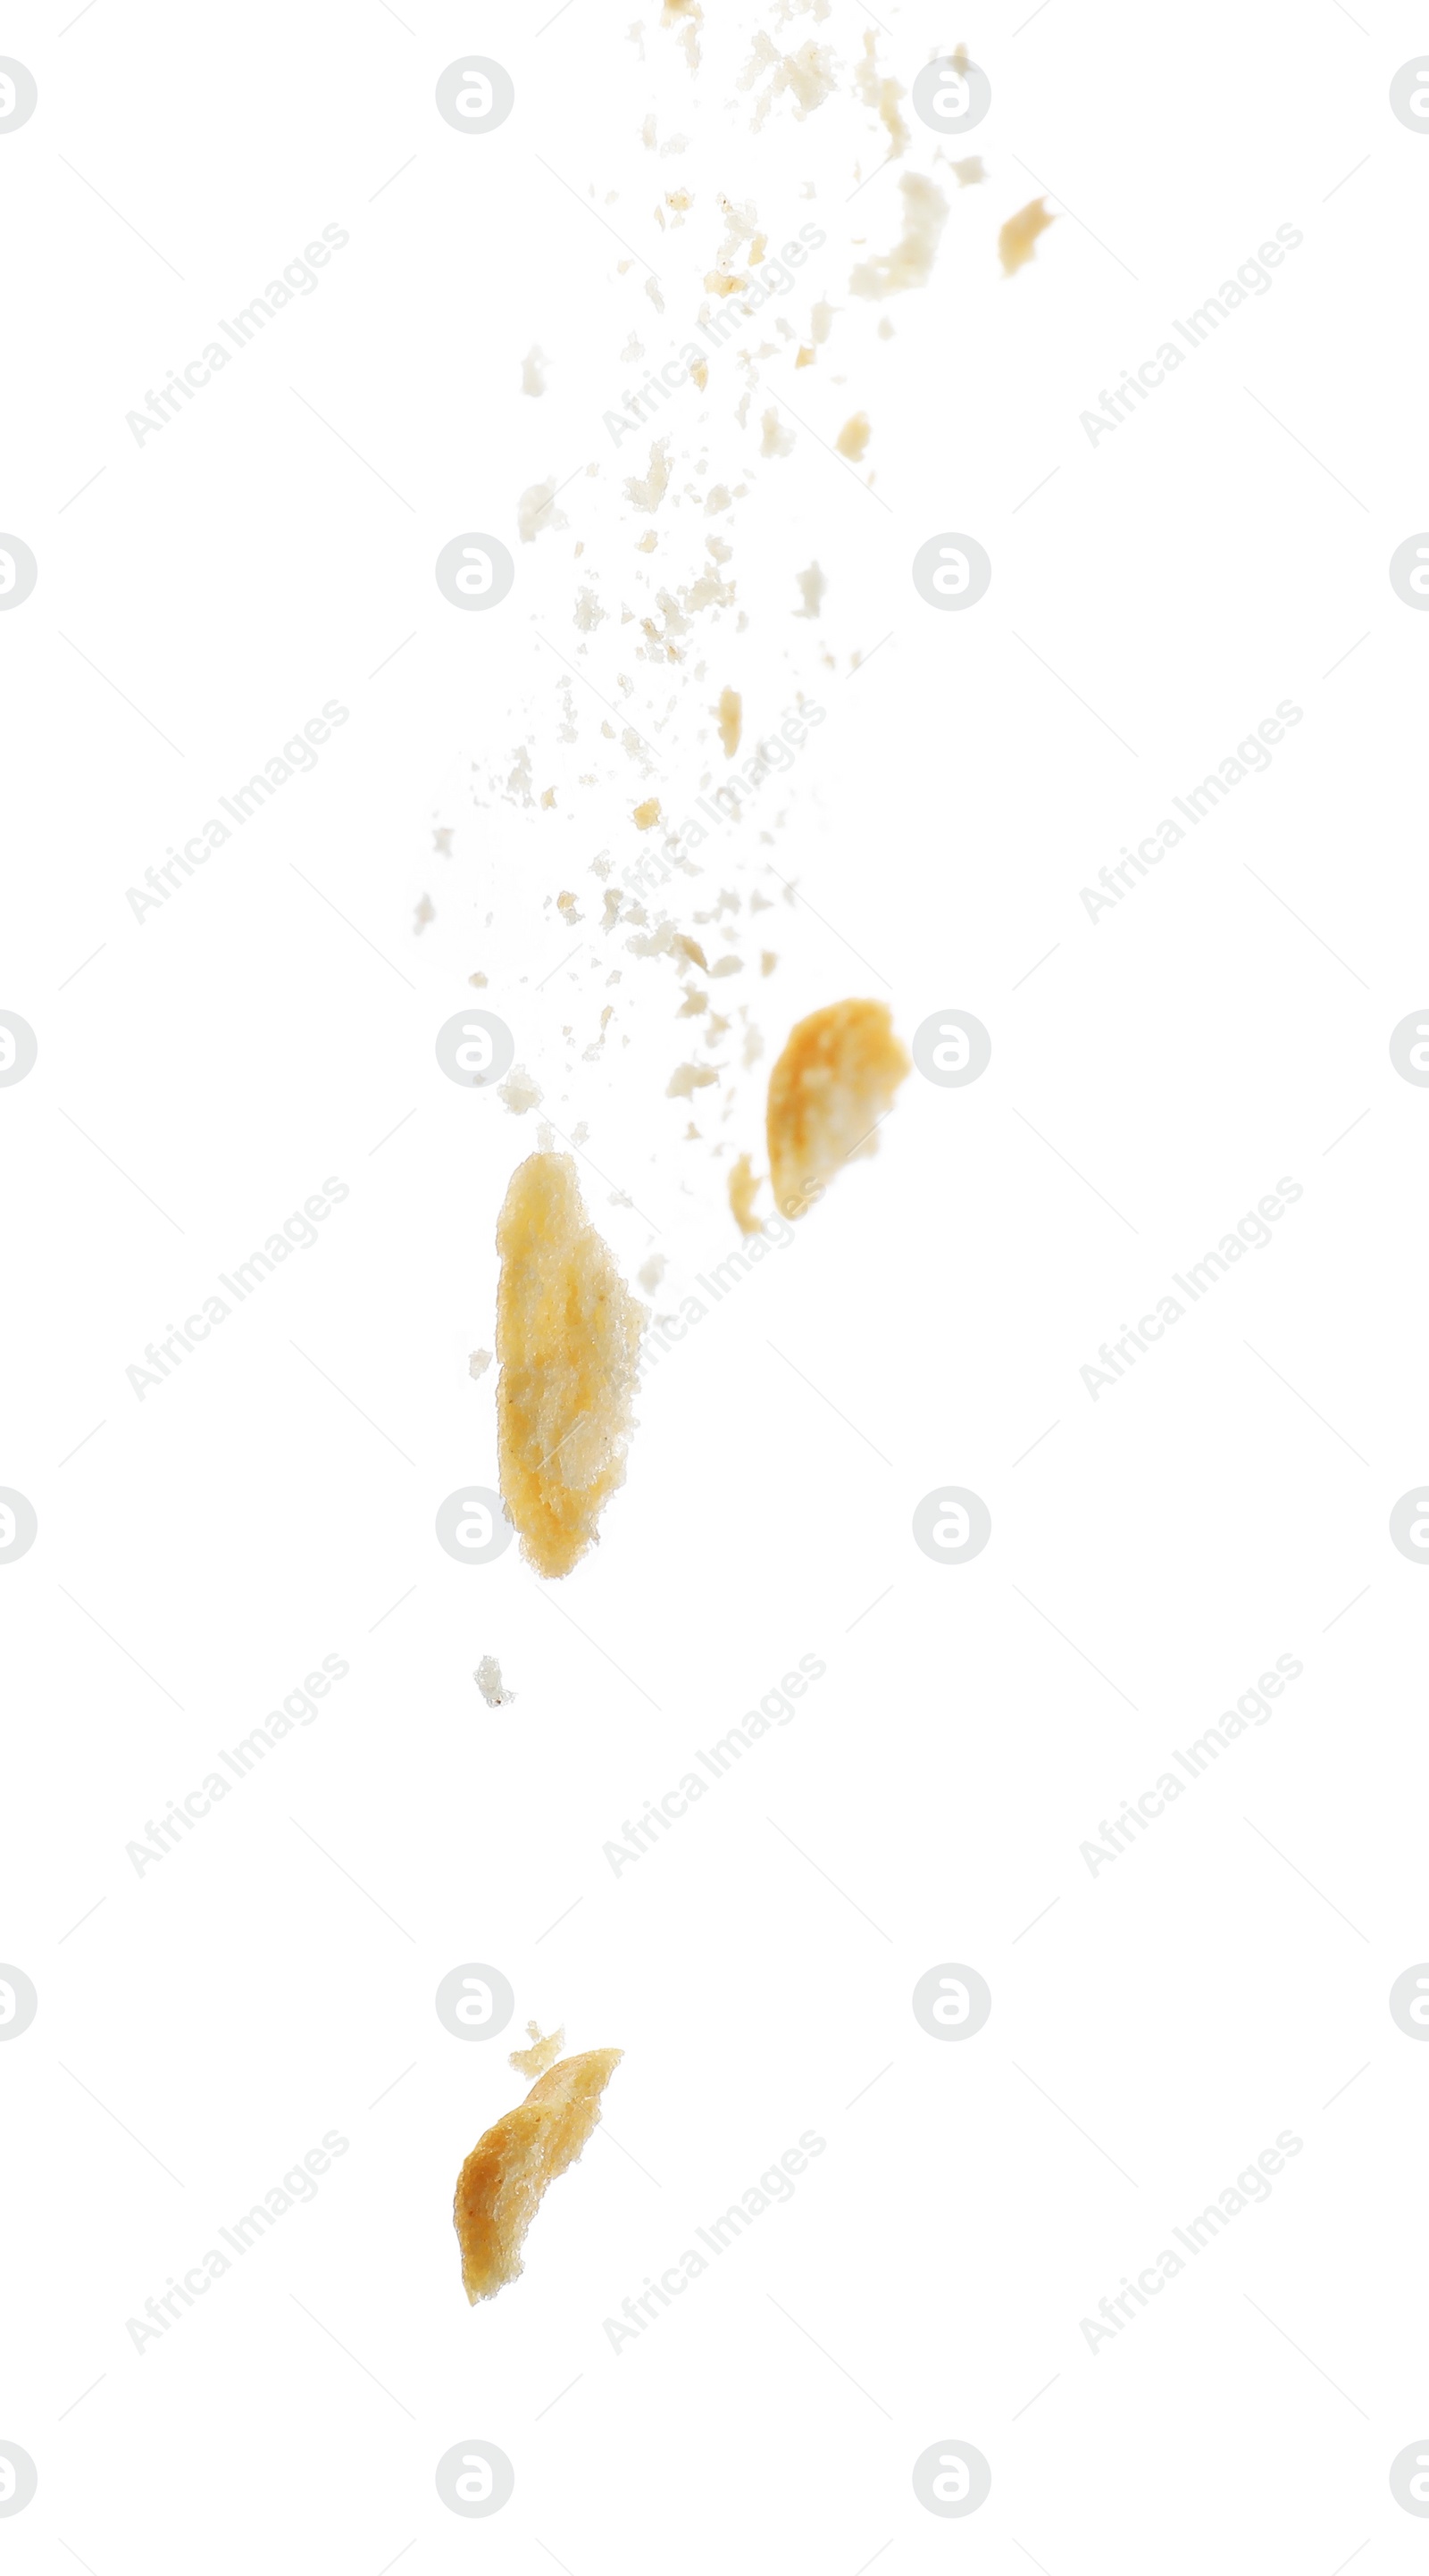 Photo of Pieces of crumbled cracker isolated on white